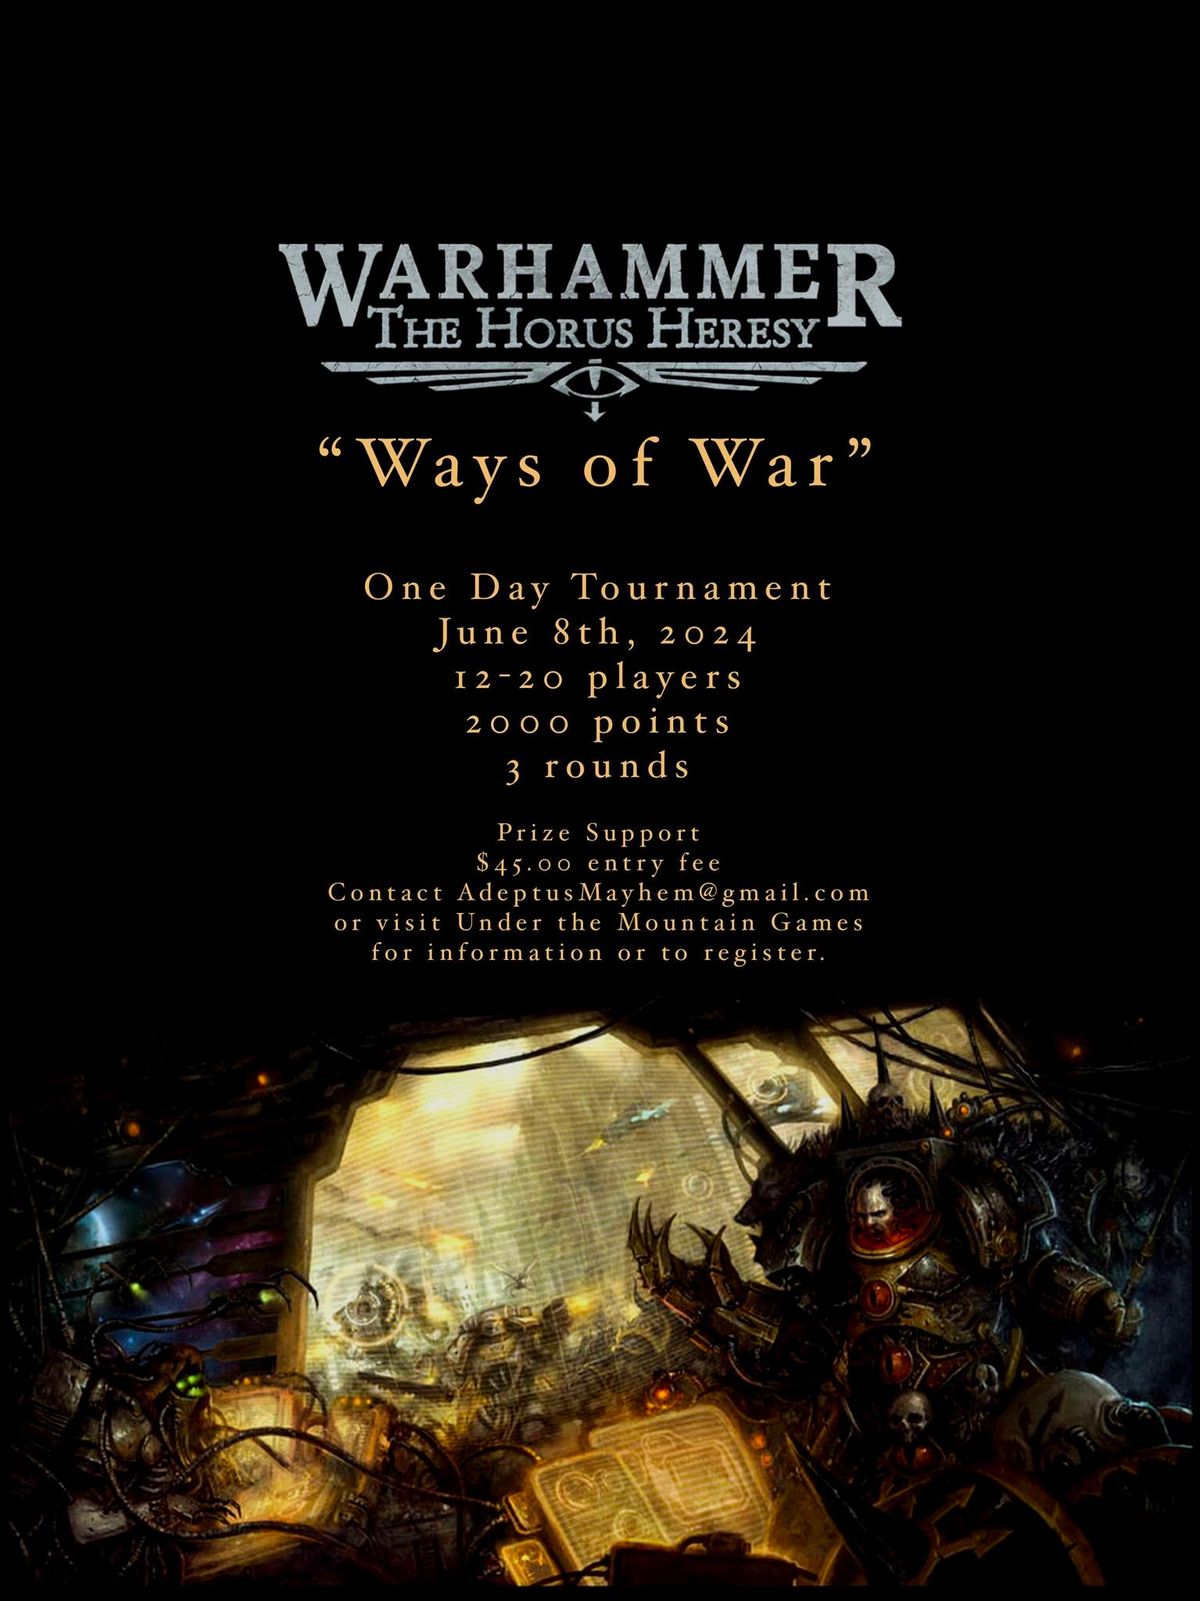 Ways of War! A Horus Heresy Tournament at Under the Mountain Games